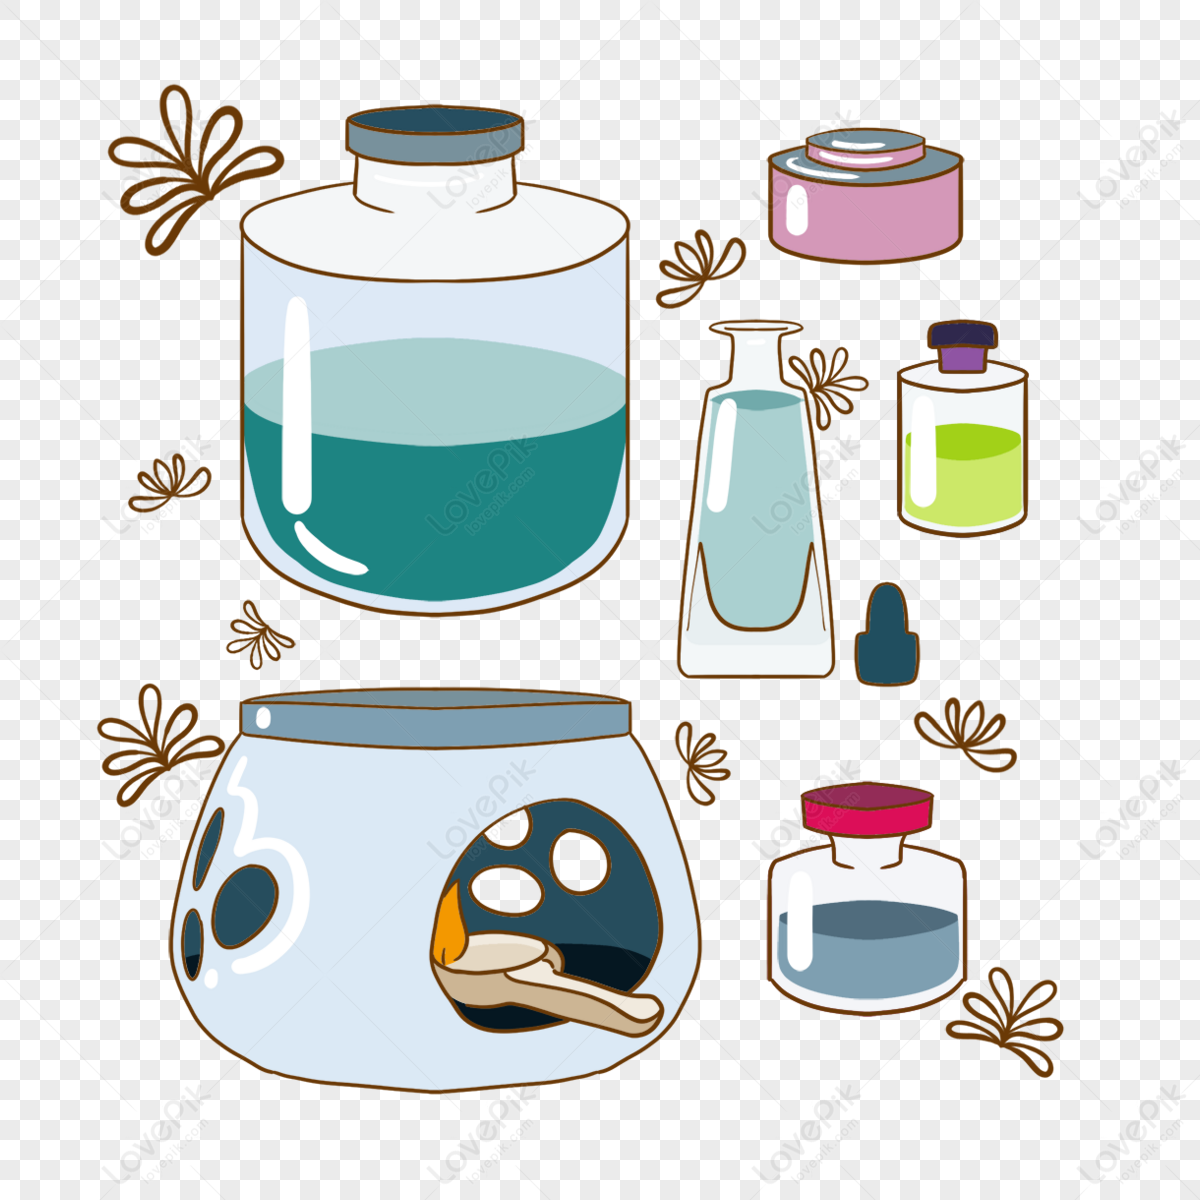 Stinky & Dirty, Stinky and Dirty, Stinky Dirty Show, Stinky and Dirty SVG,  Stinky and Dirty PNG, Stinky and Dirty Clip Art